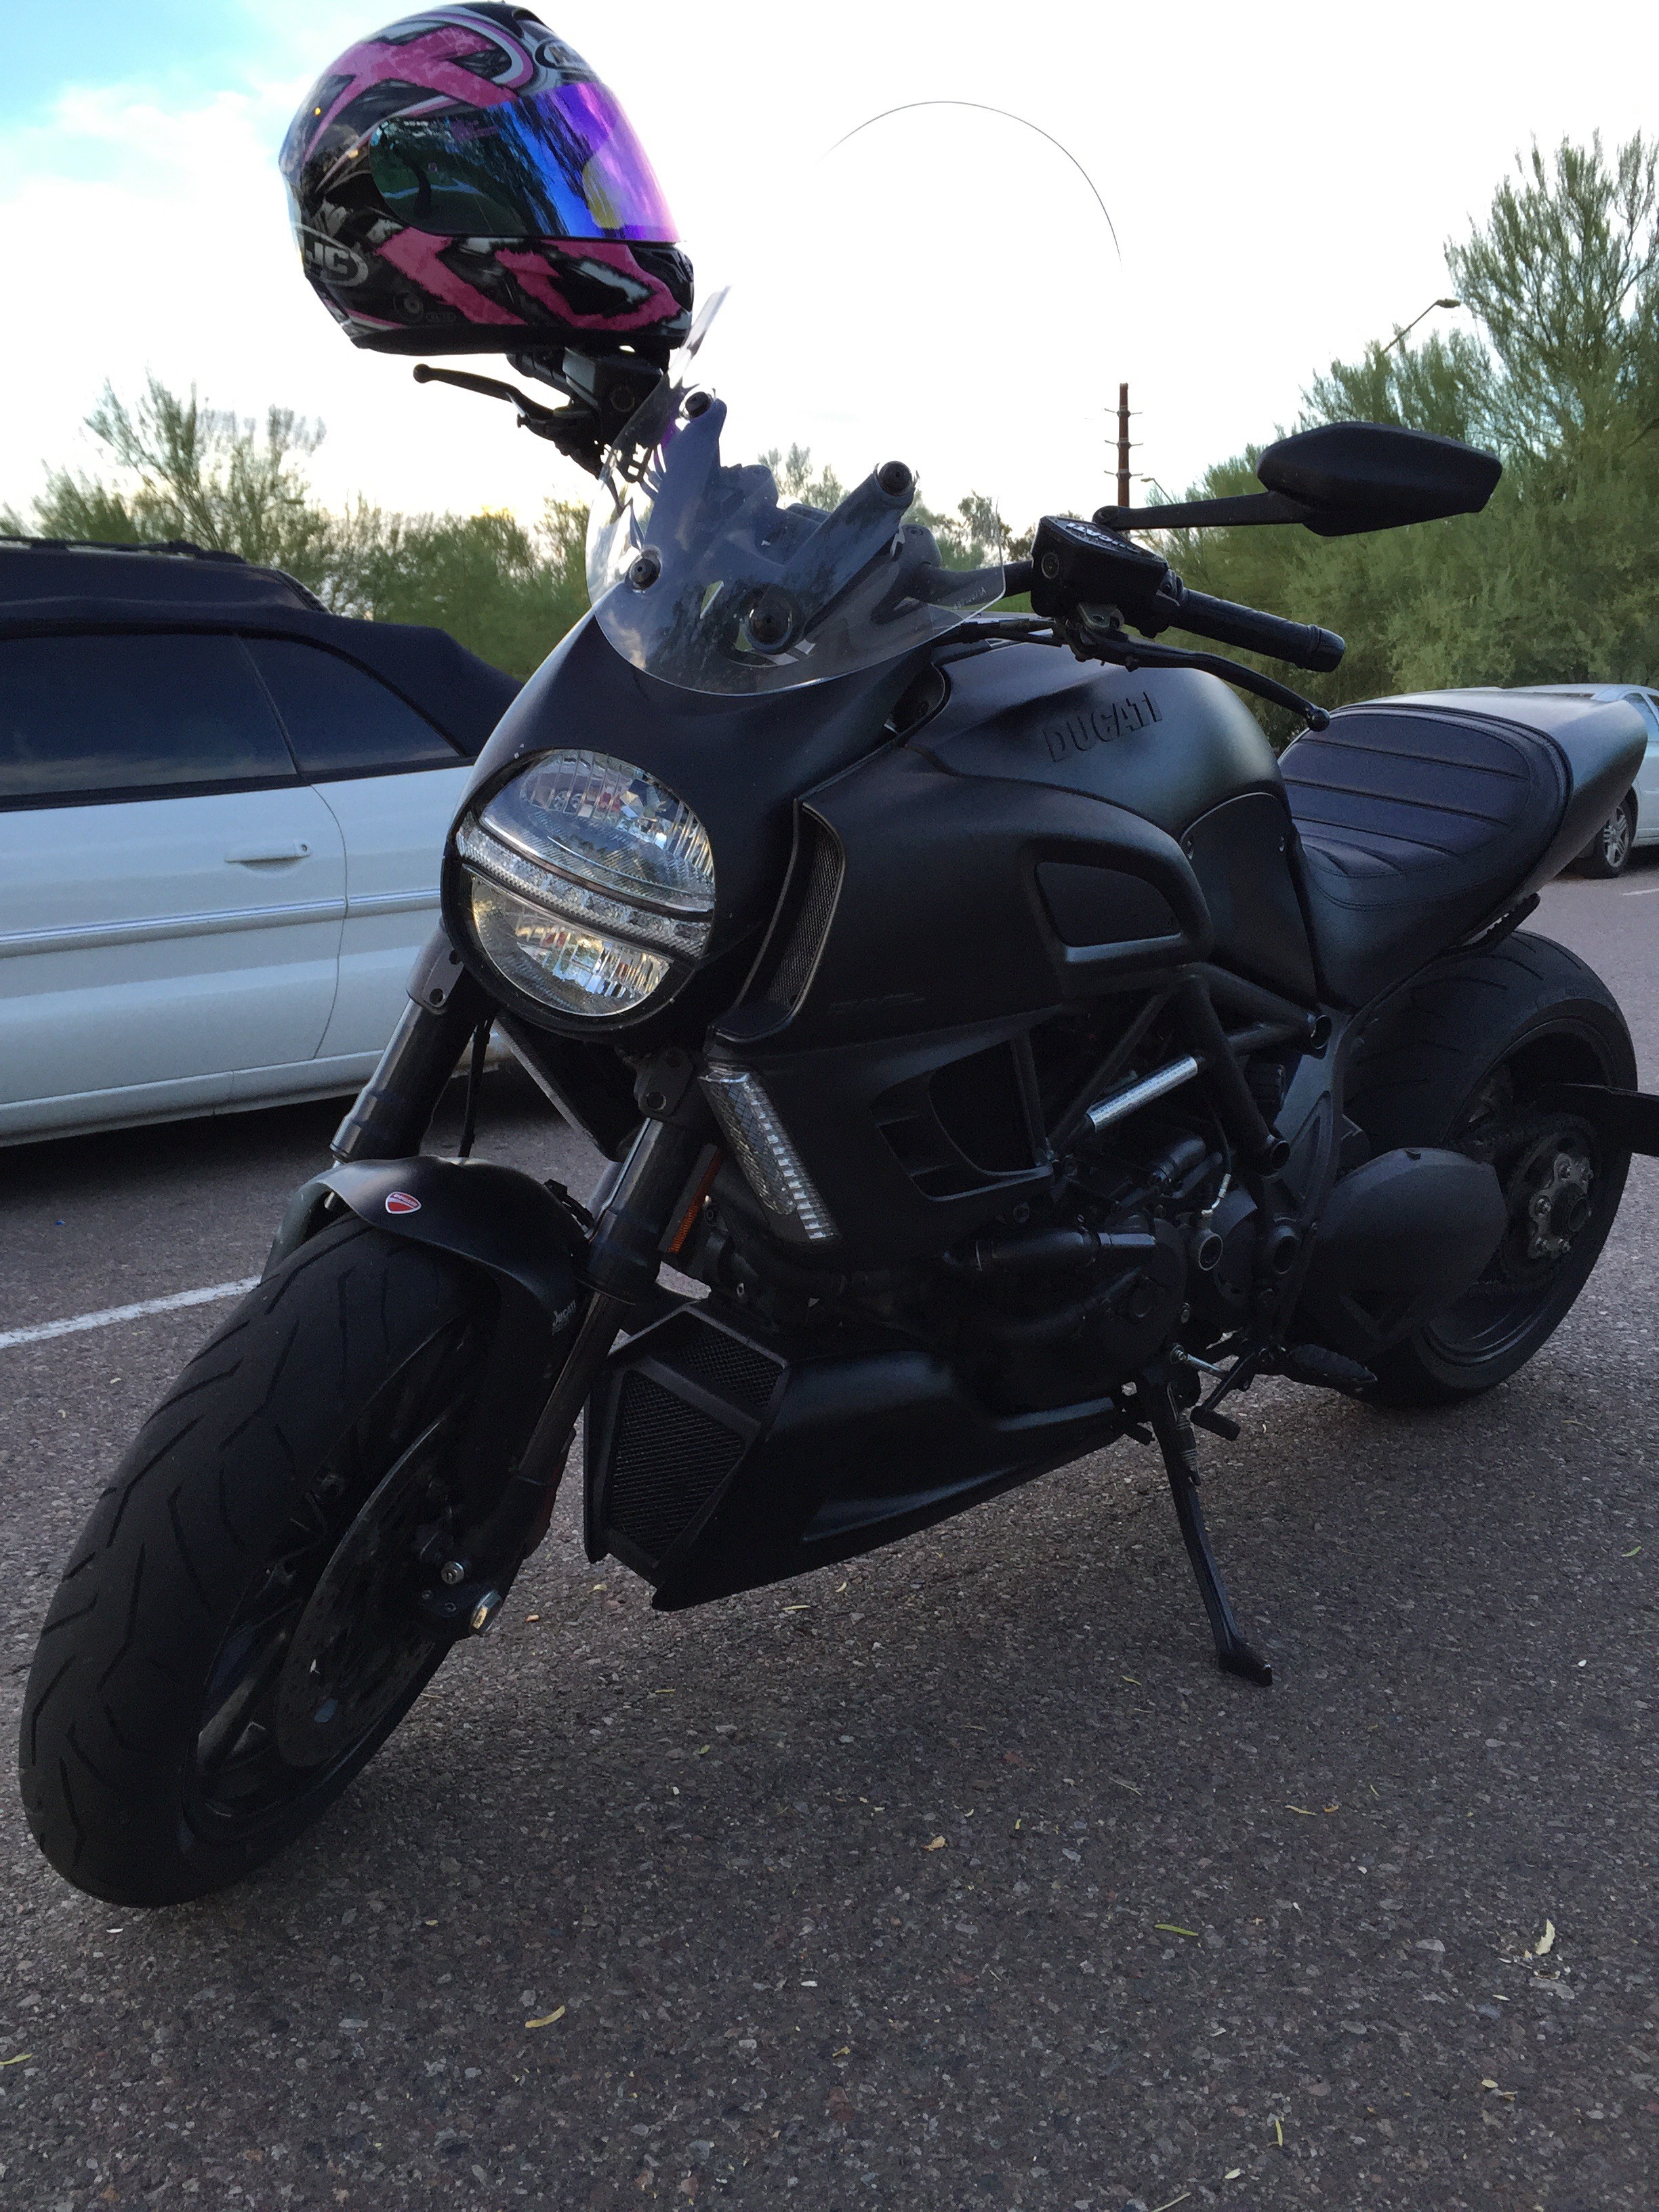 Blacked Out Ducati Diavel On The Go